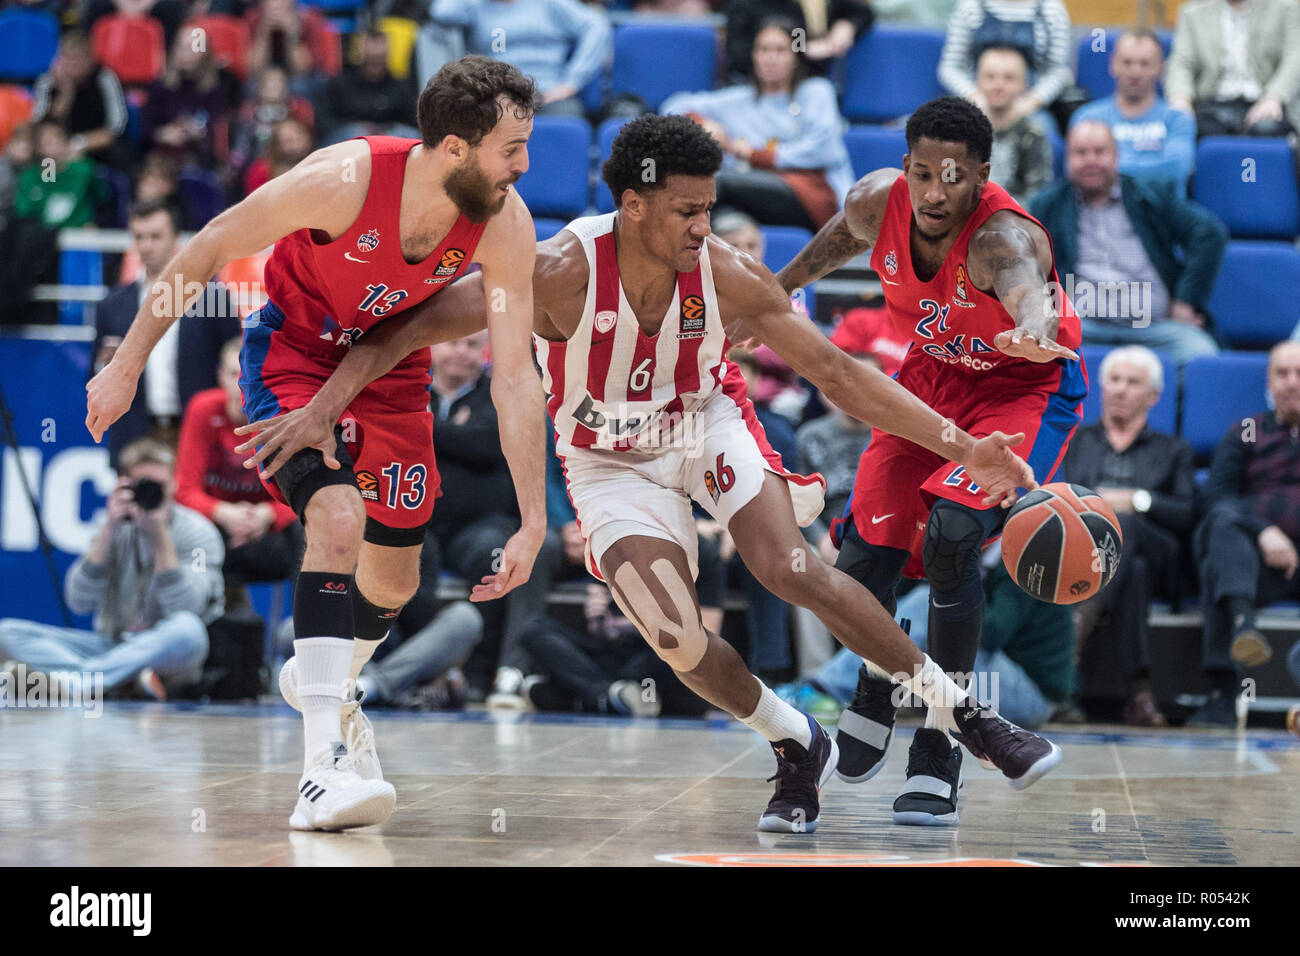 Moscow. 1st Nov, 2018. Sergio Rodriguez (L) and Will Clyburn (R) of CSKA vies with Axel Toupane of Olympiacos Piraeus during the 2018-19 Euroleague game between CSKA Moscow and Olympiacos Piraeus in Moscow, Russia on Nov. 1, 2018. CSKA won 69-65. Credit: Wu Zhuang/Xinhua/Alamy Live News Stock Photo